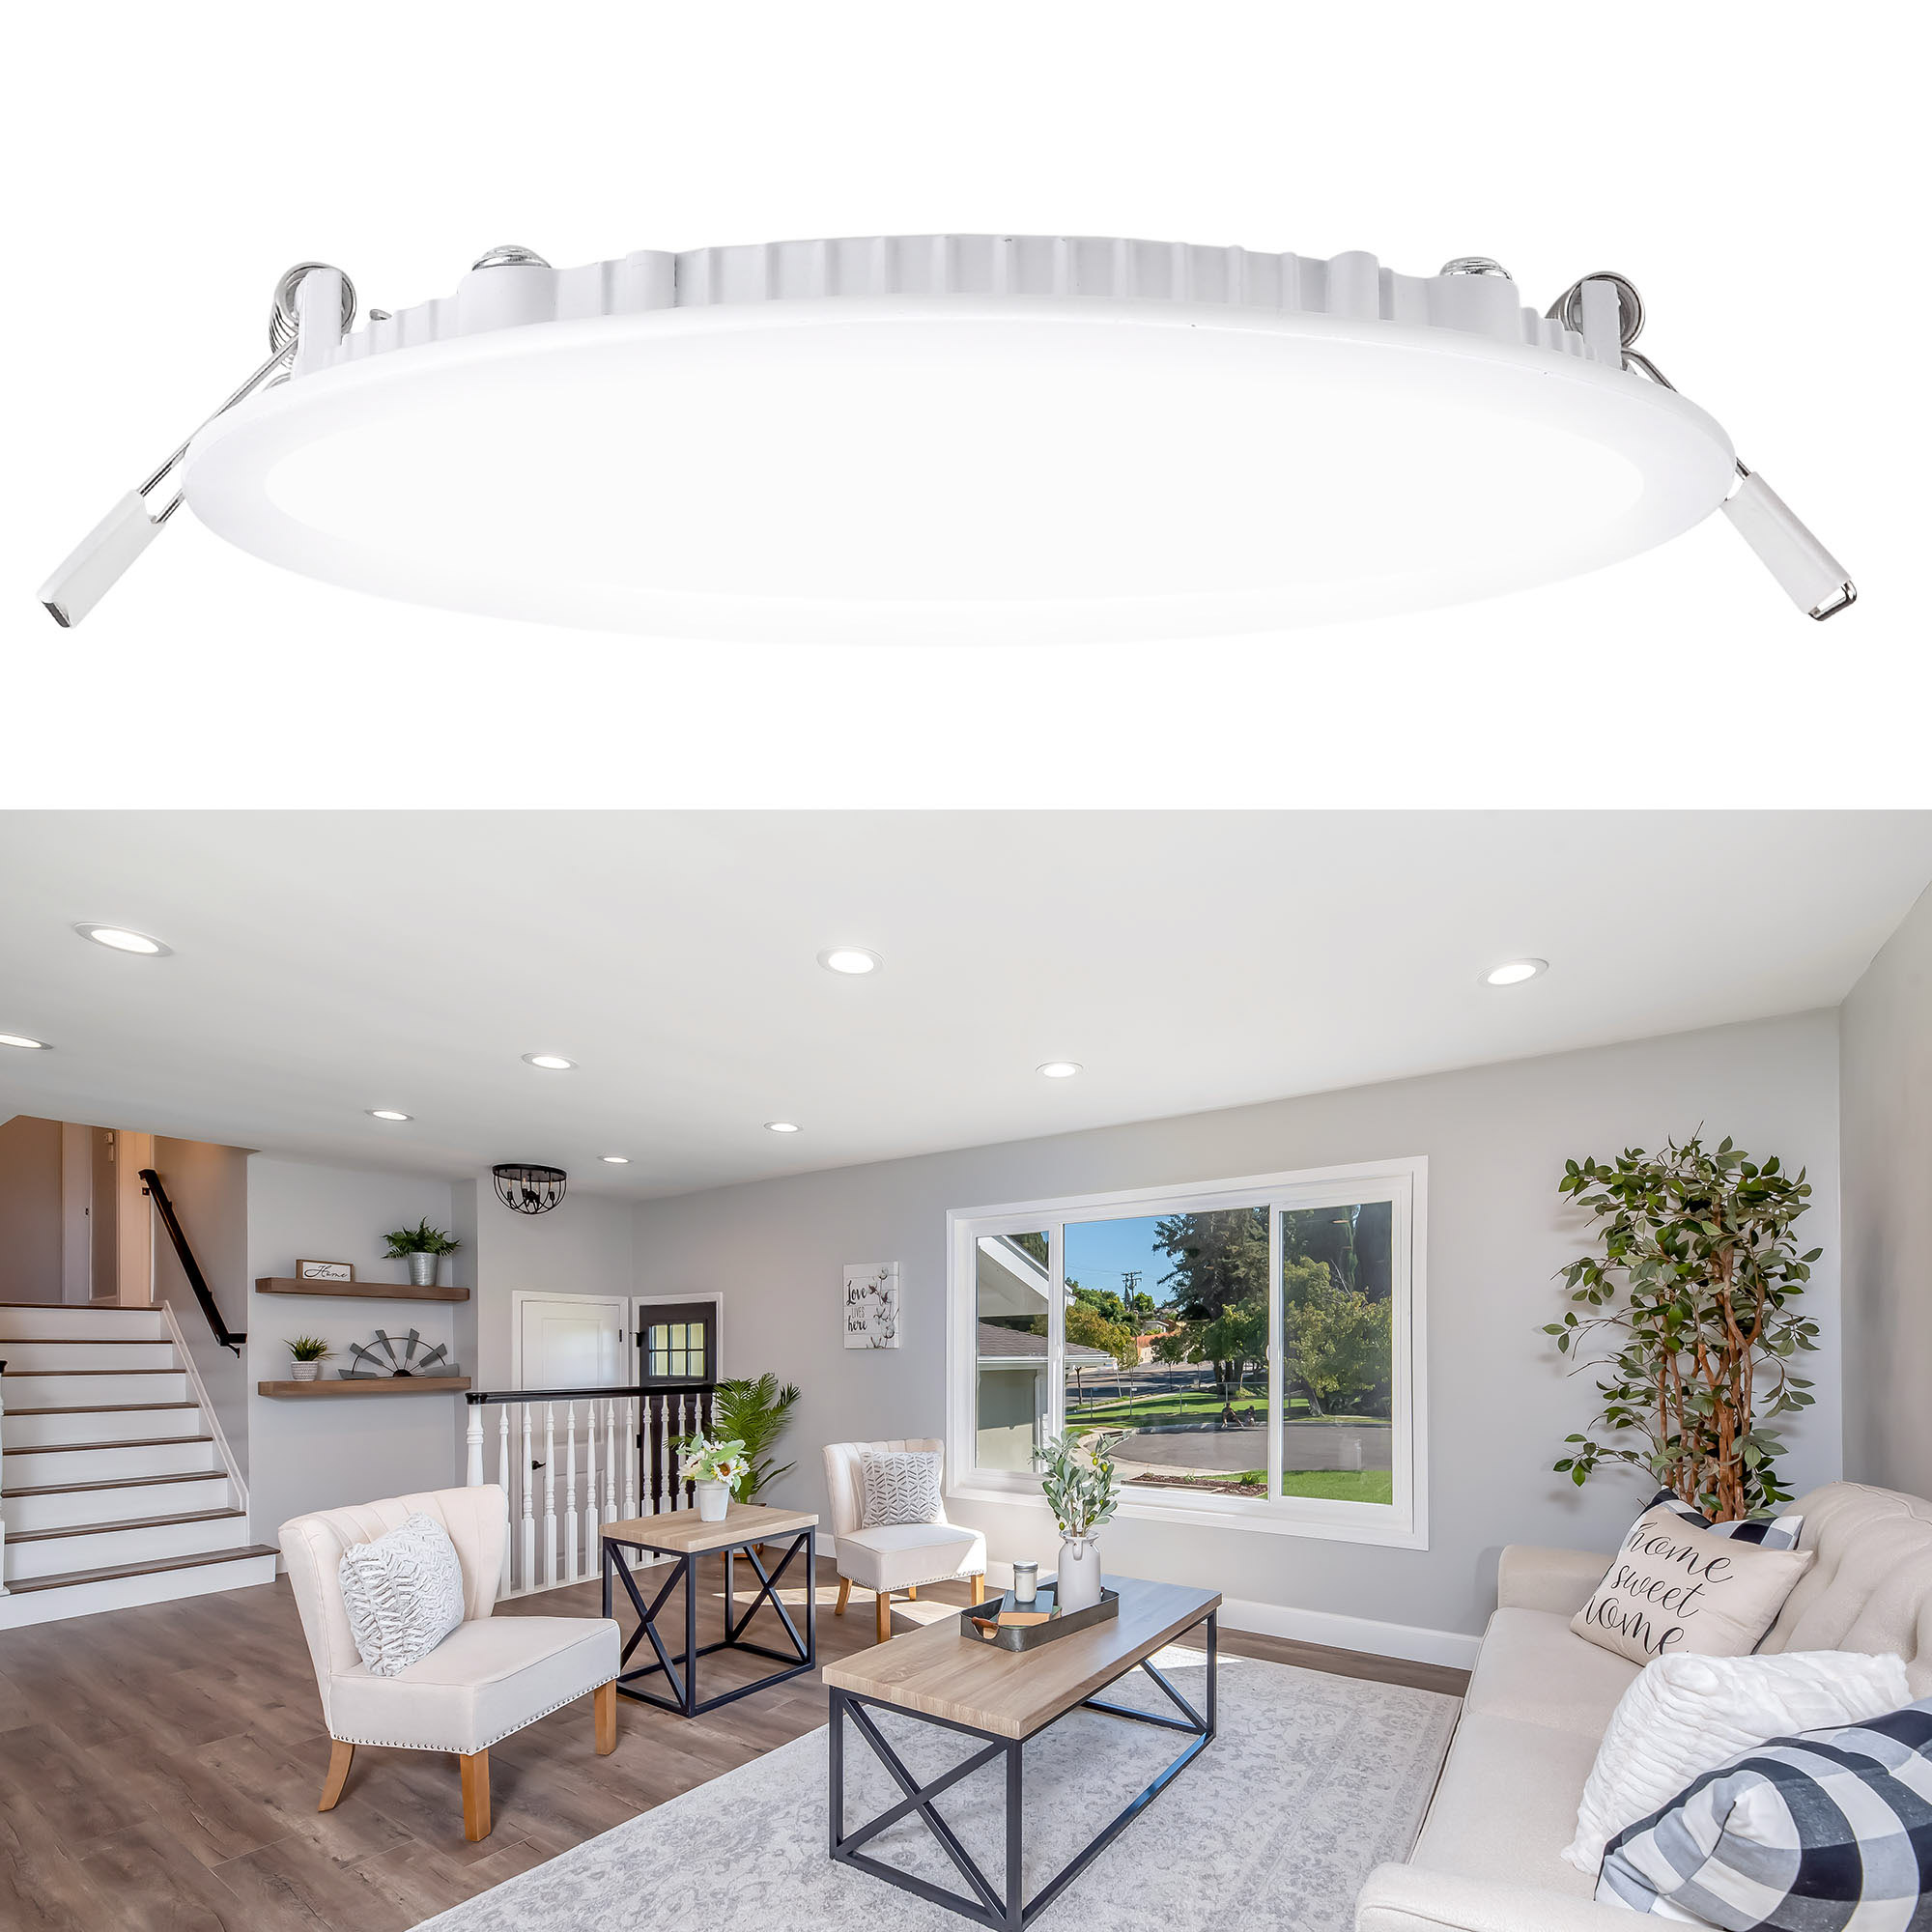 DELight Inch LED Recessed Ceiling Light Panel 6000-6500K Cool White  1440LM Canless Downlight 18W=150W Ultra-thin Wafer Fixtures ROHS Certified 